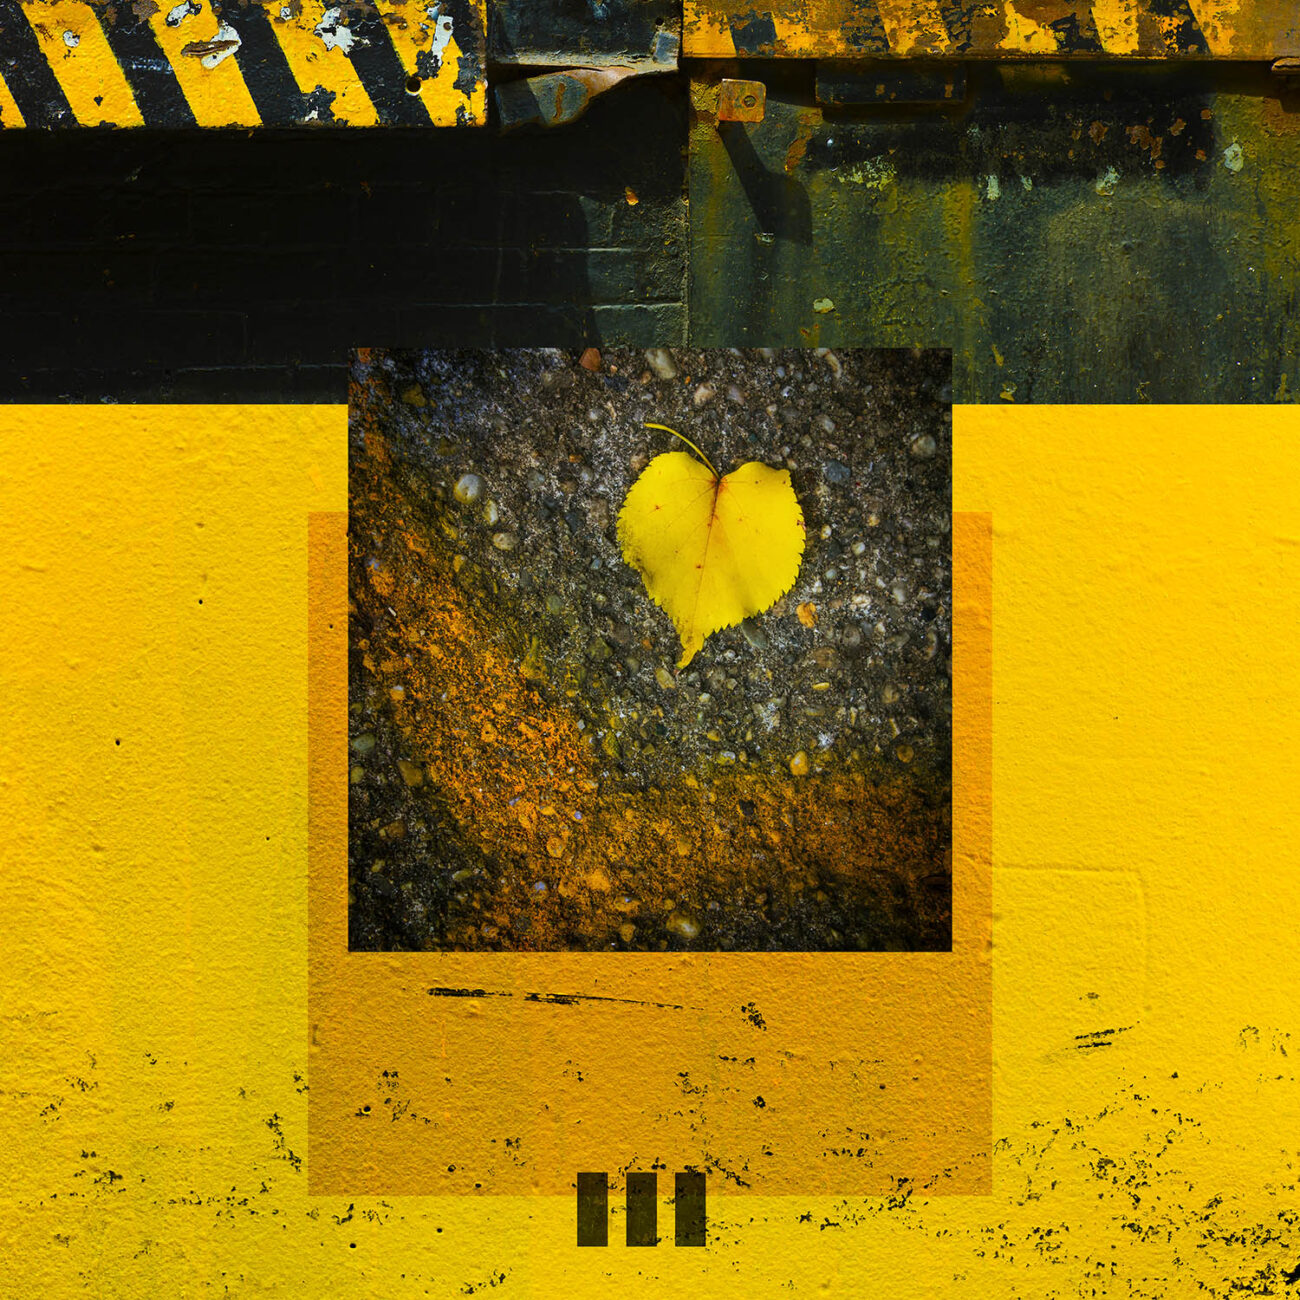 The yellow heart